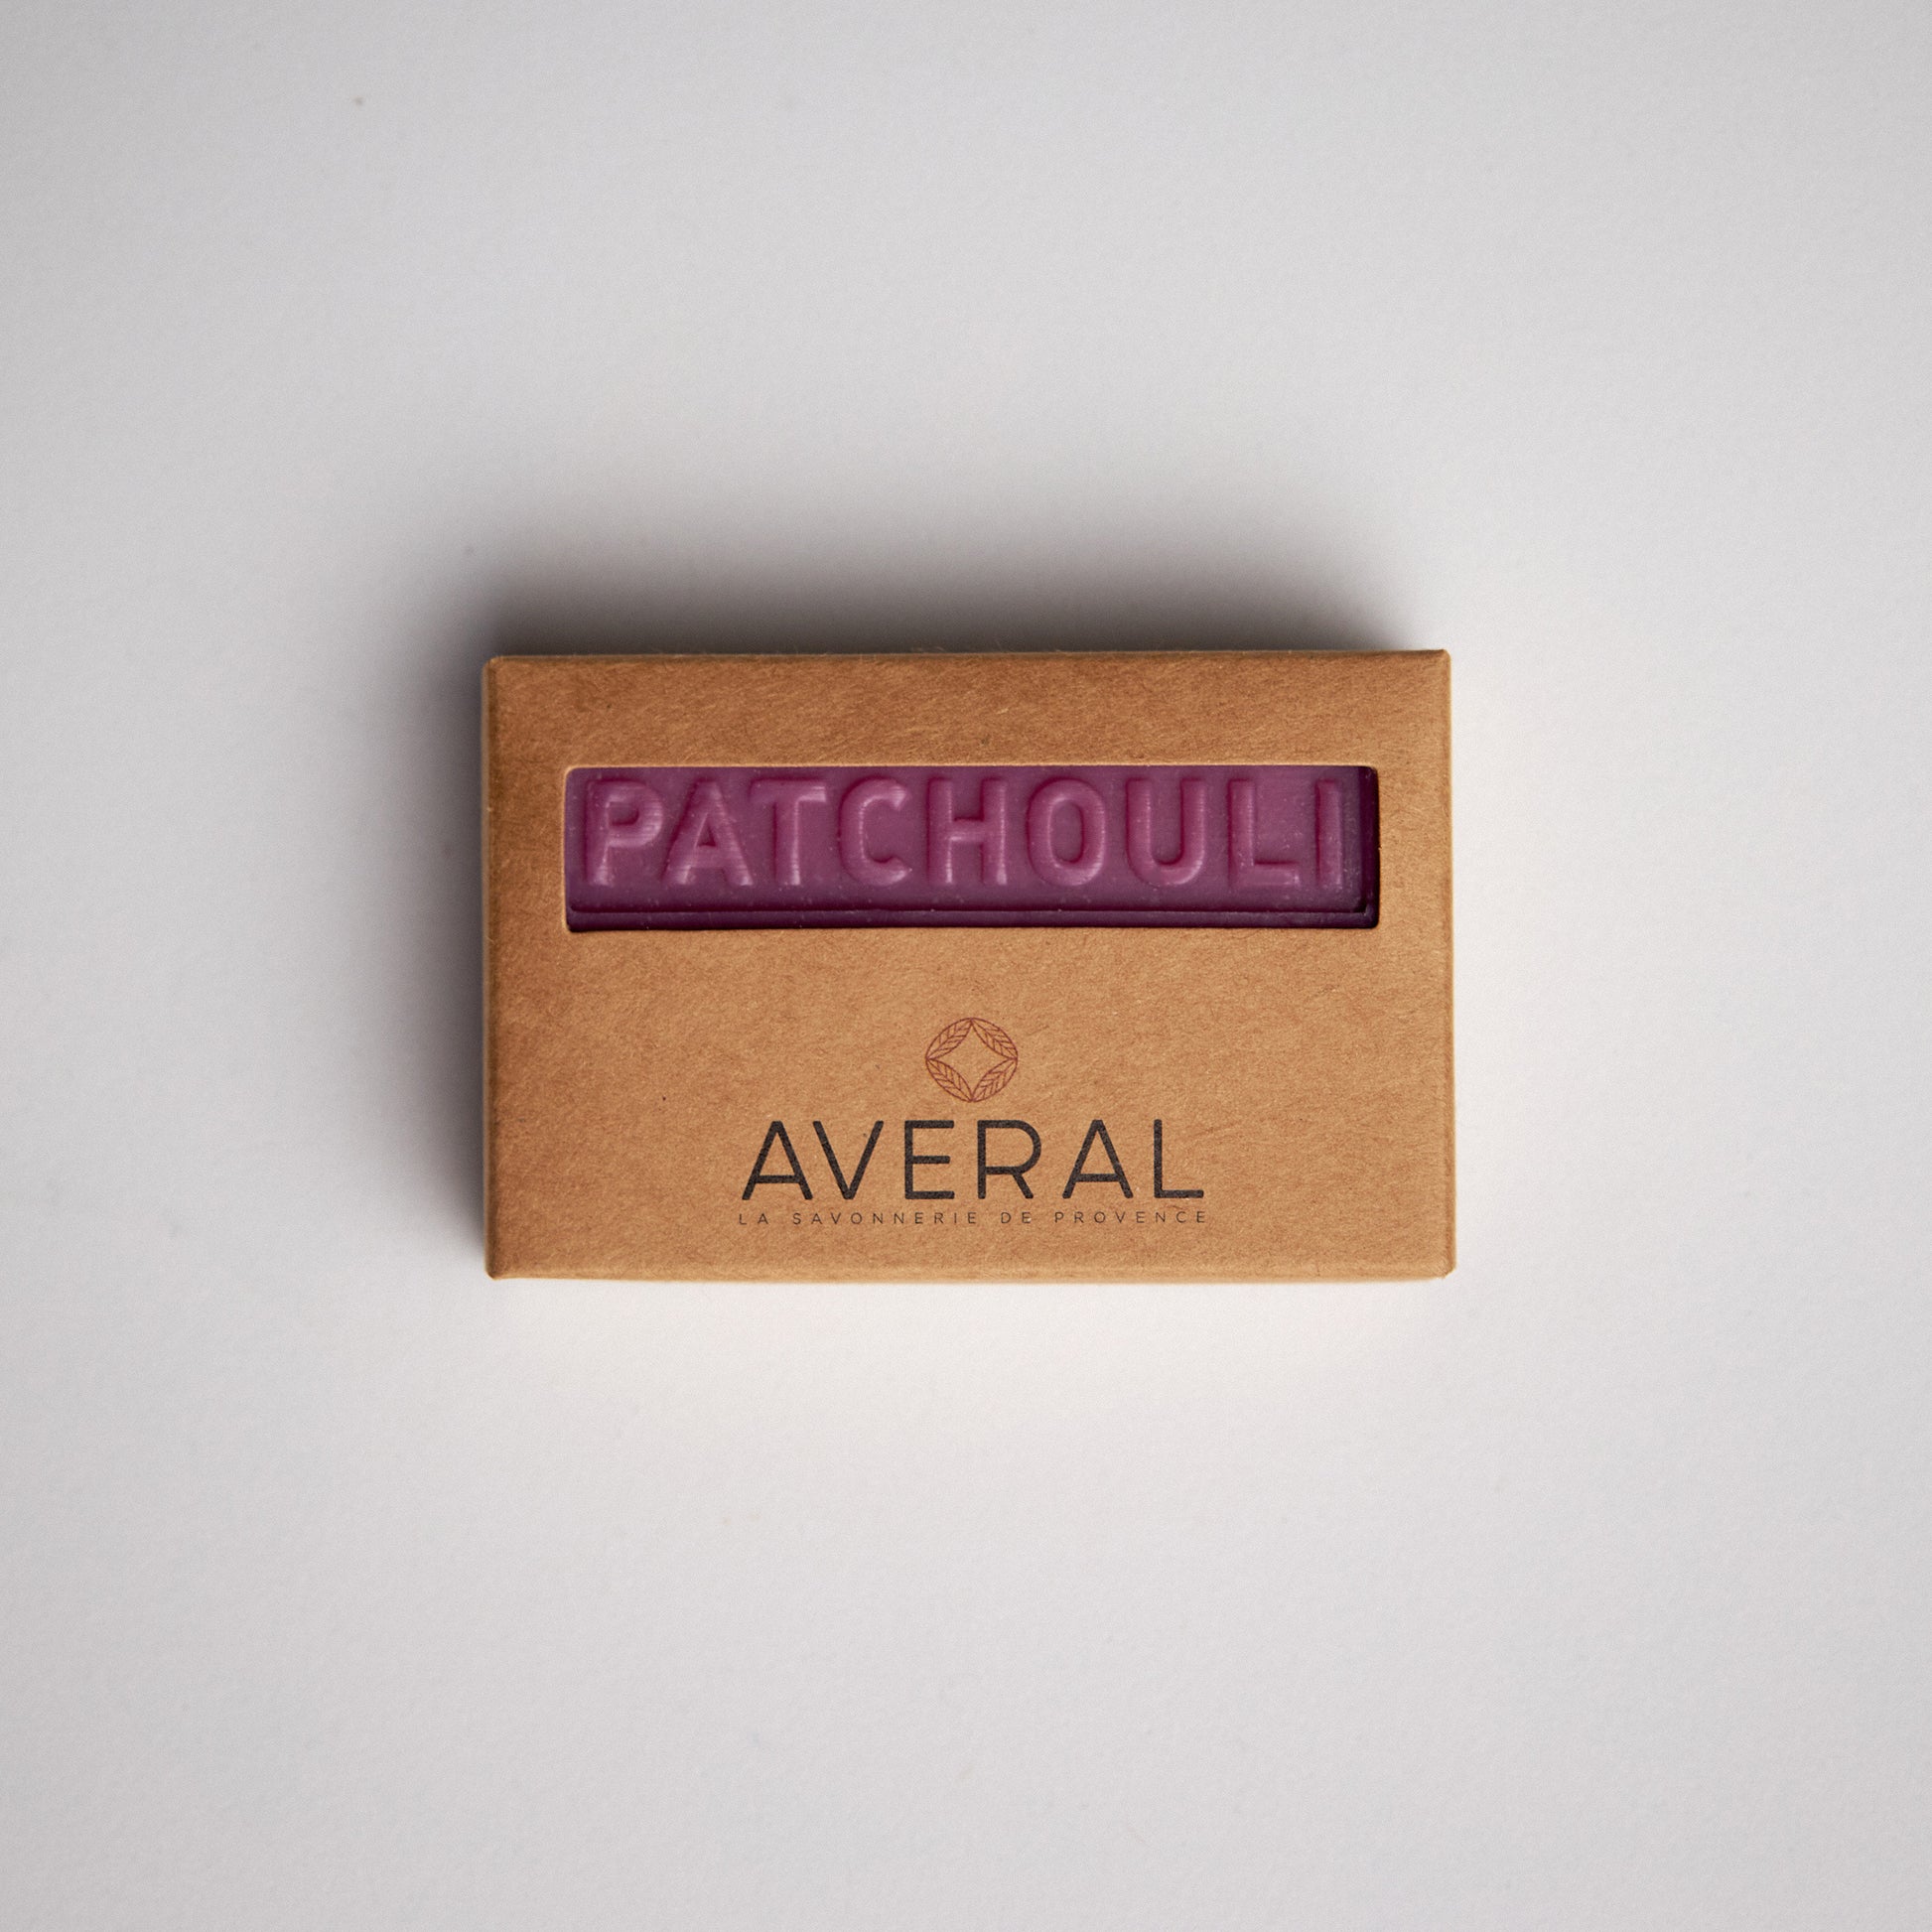 Patchouli French soap